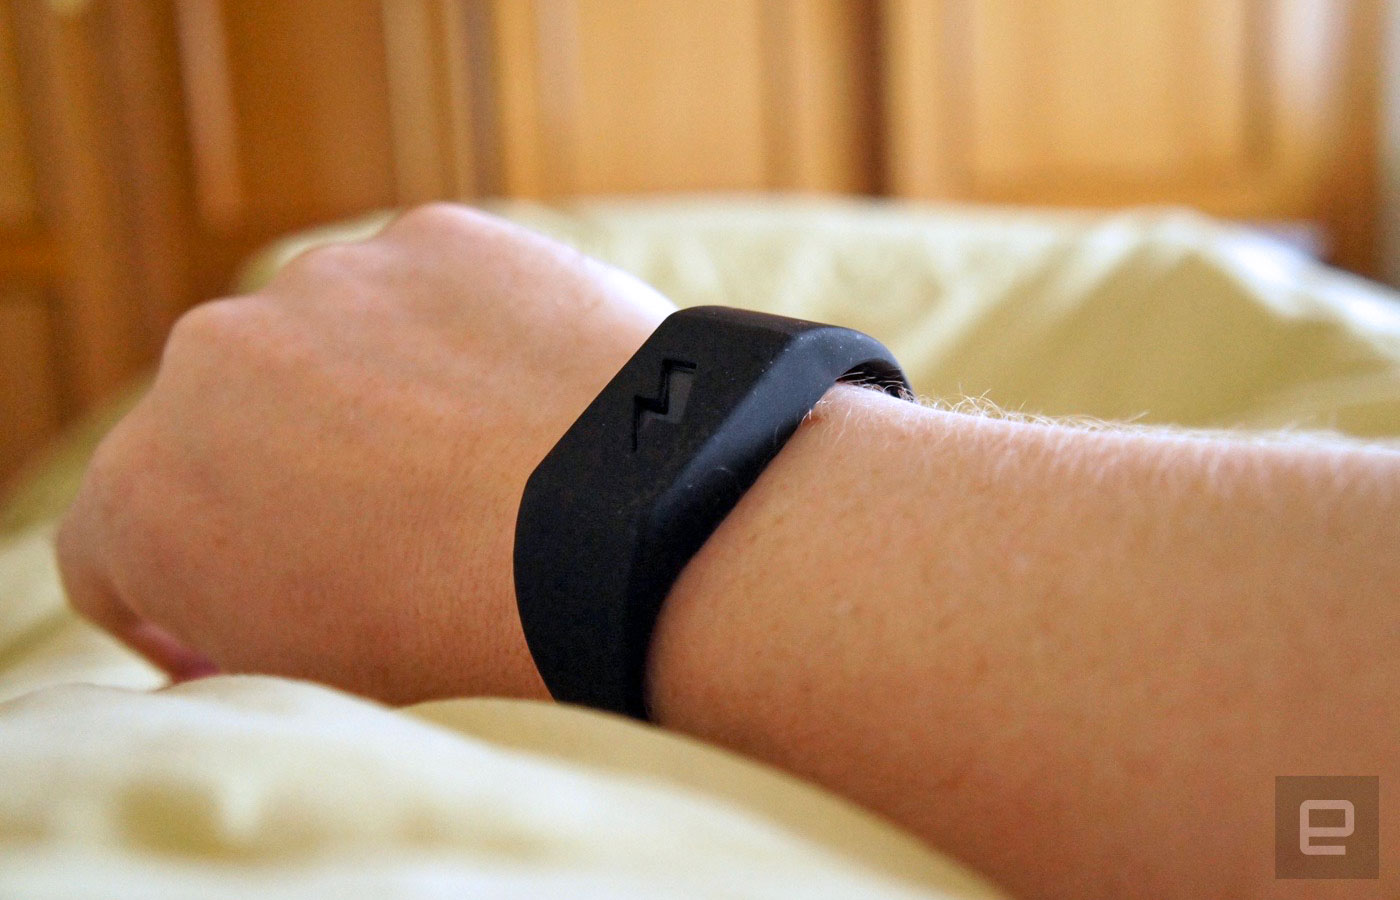 The Shock Clock band uses fear and electricity to wake you up